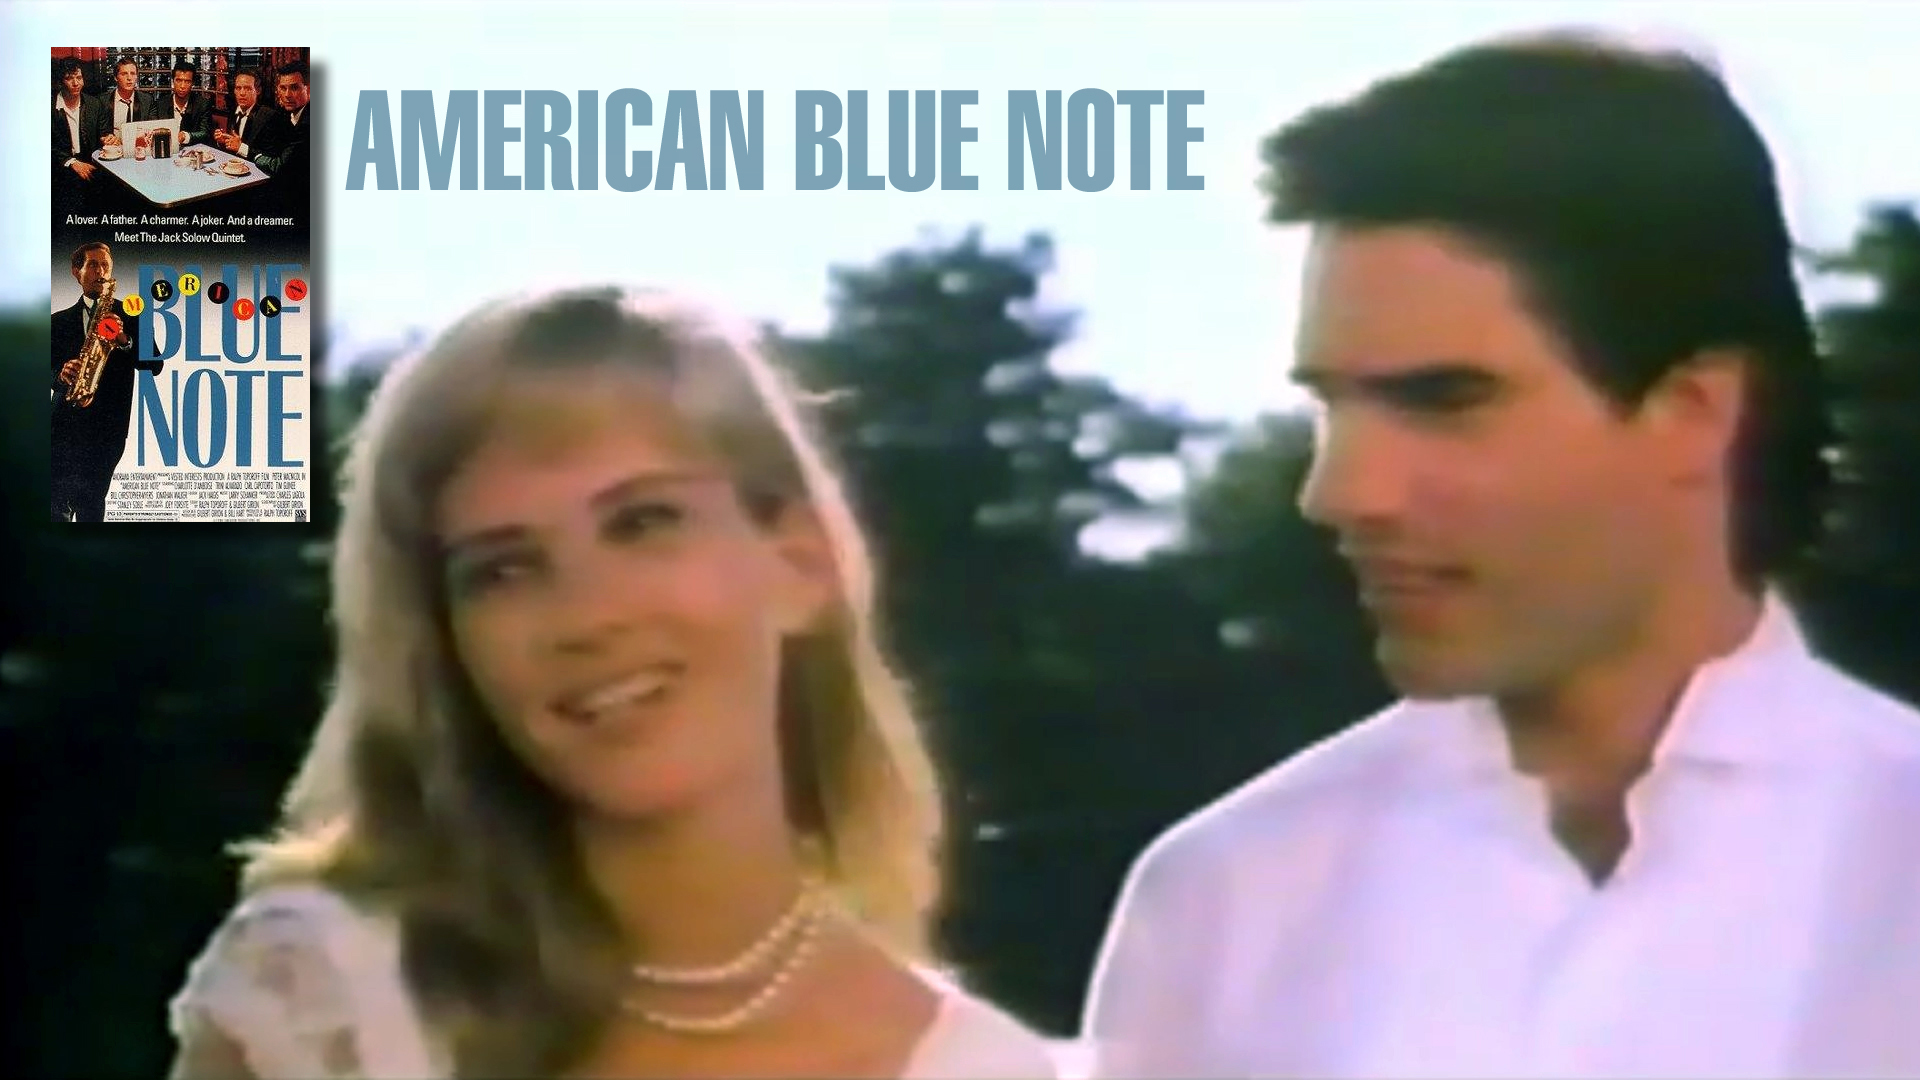 American Blue Note (1989) - Todd McDurmont co-stars as the Groom in this wedding scene. Starring Peter MacNicol, Carl Capotorto, Time Guinee and Bill Chistoper-Myers.